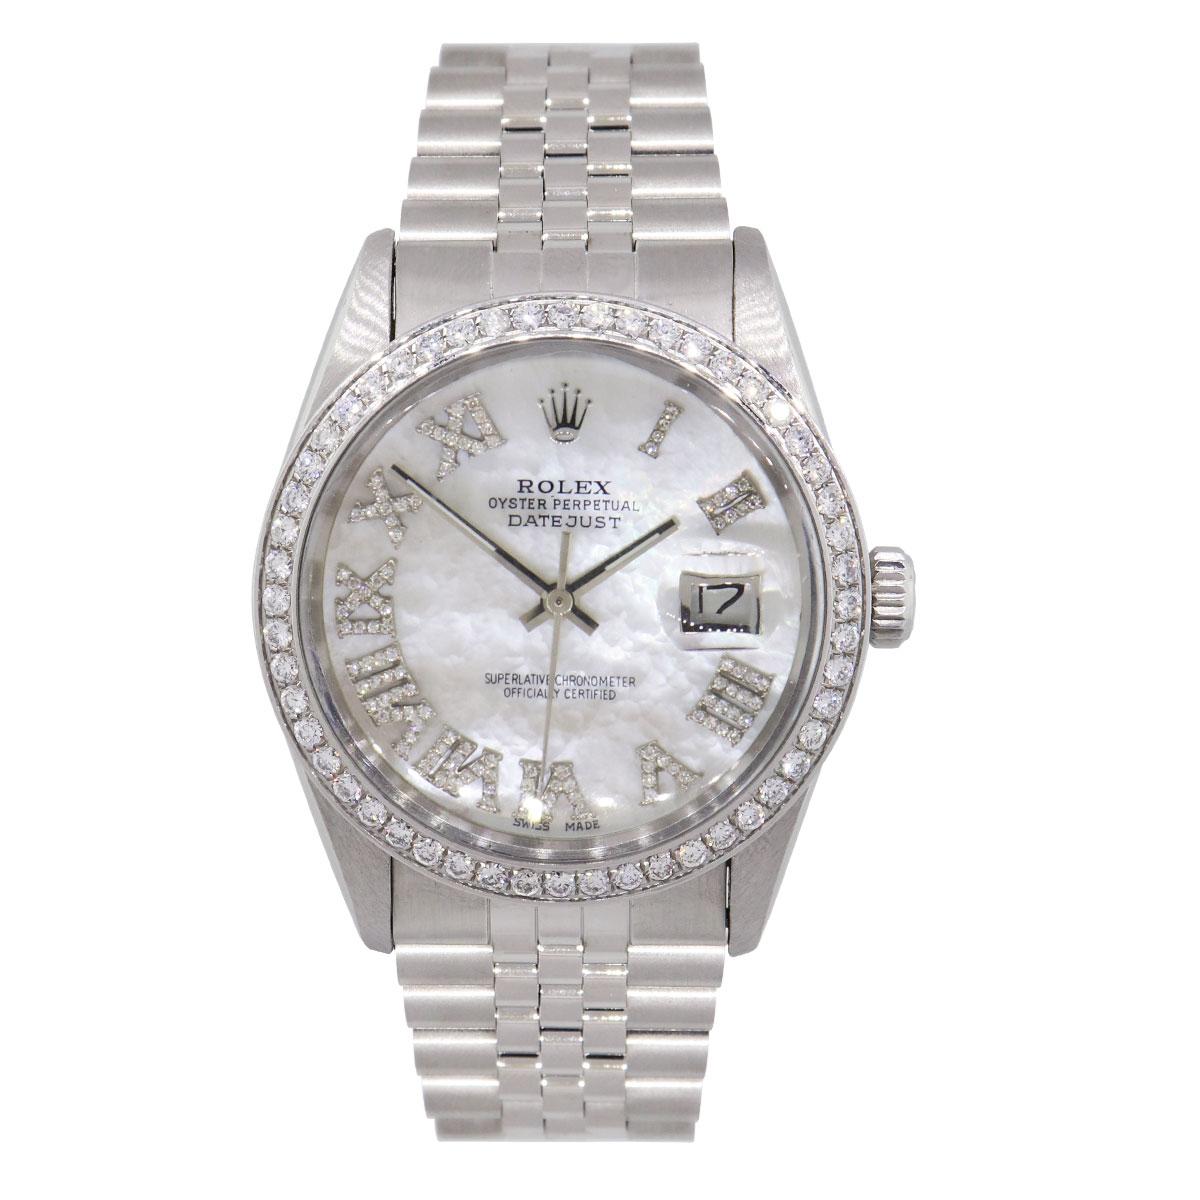 Brand: Rolex
Model: Datejust
Reference Number: 16014
Serial: 8 mill. serial
Material: Stainless Steel
Dial: Mother of pearl diamond roman dial (aftermarket)
Bezel: Round brilliant diamond bezel (aftermarket)
Case Measurements: 36mm
Bracelet: